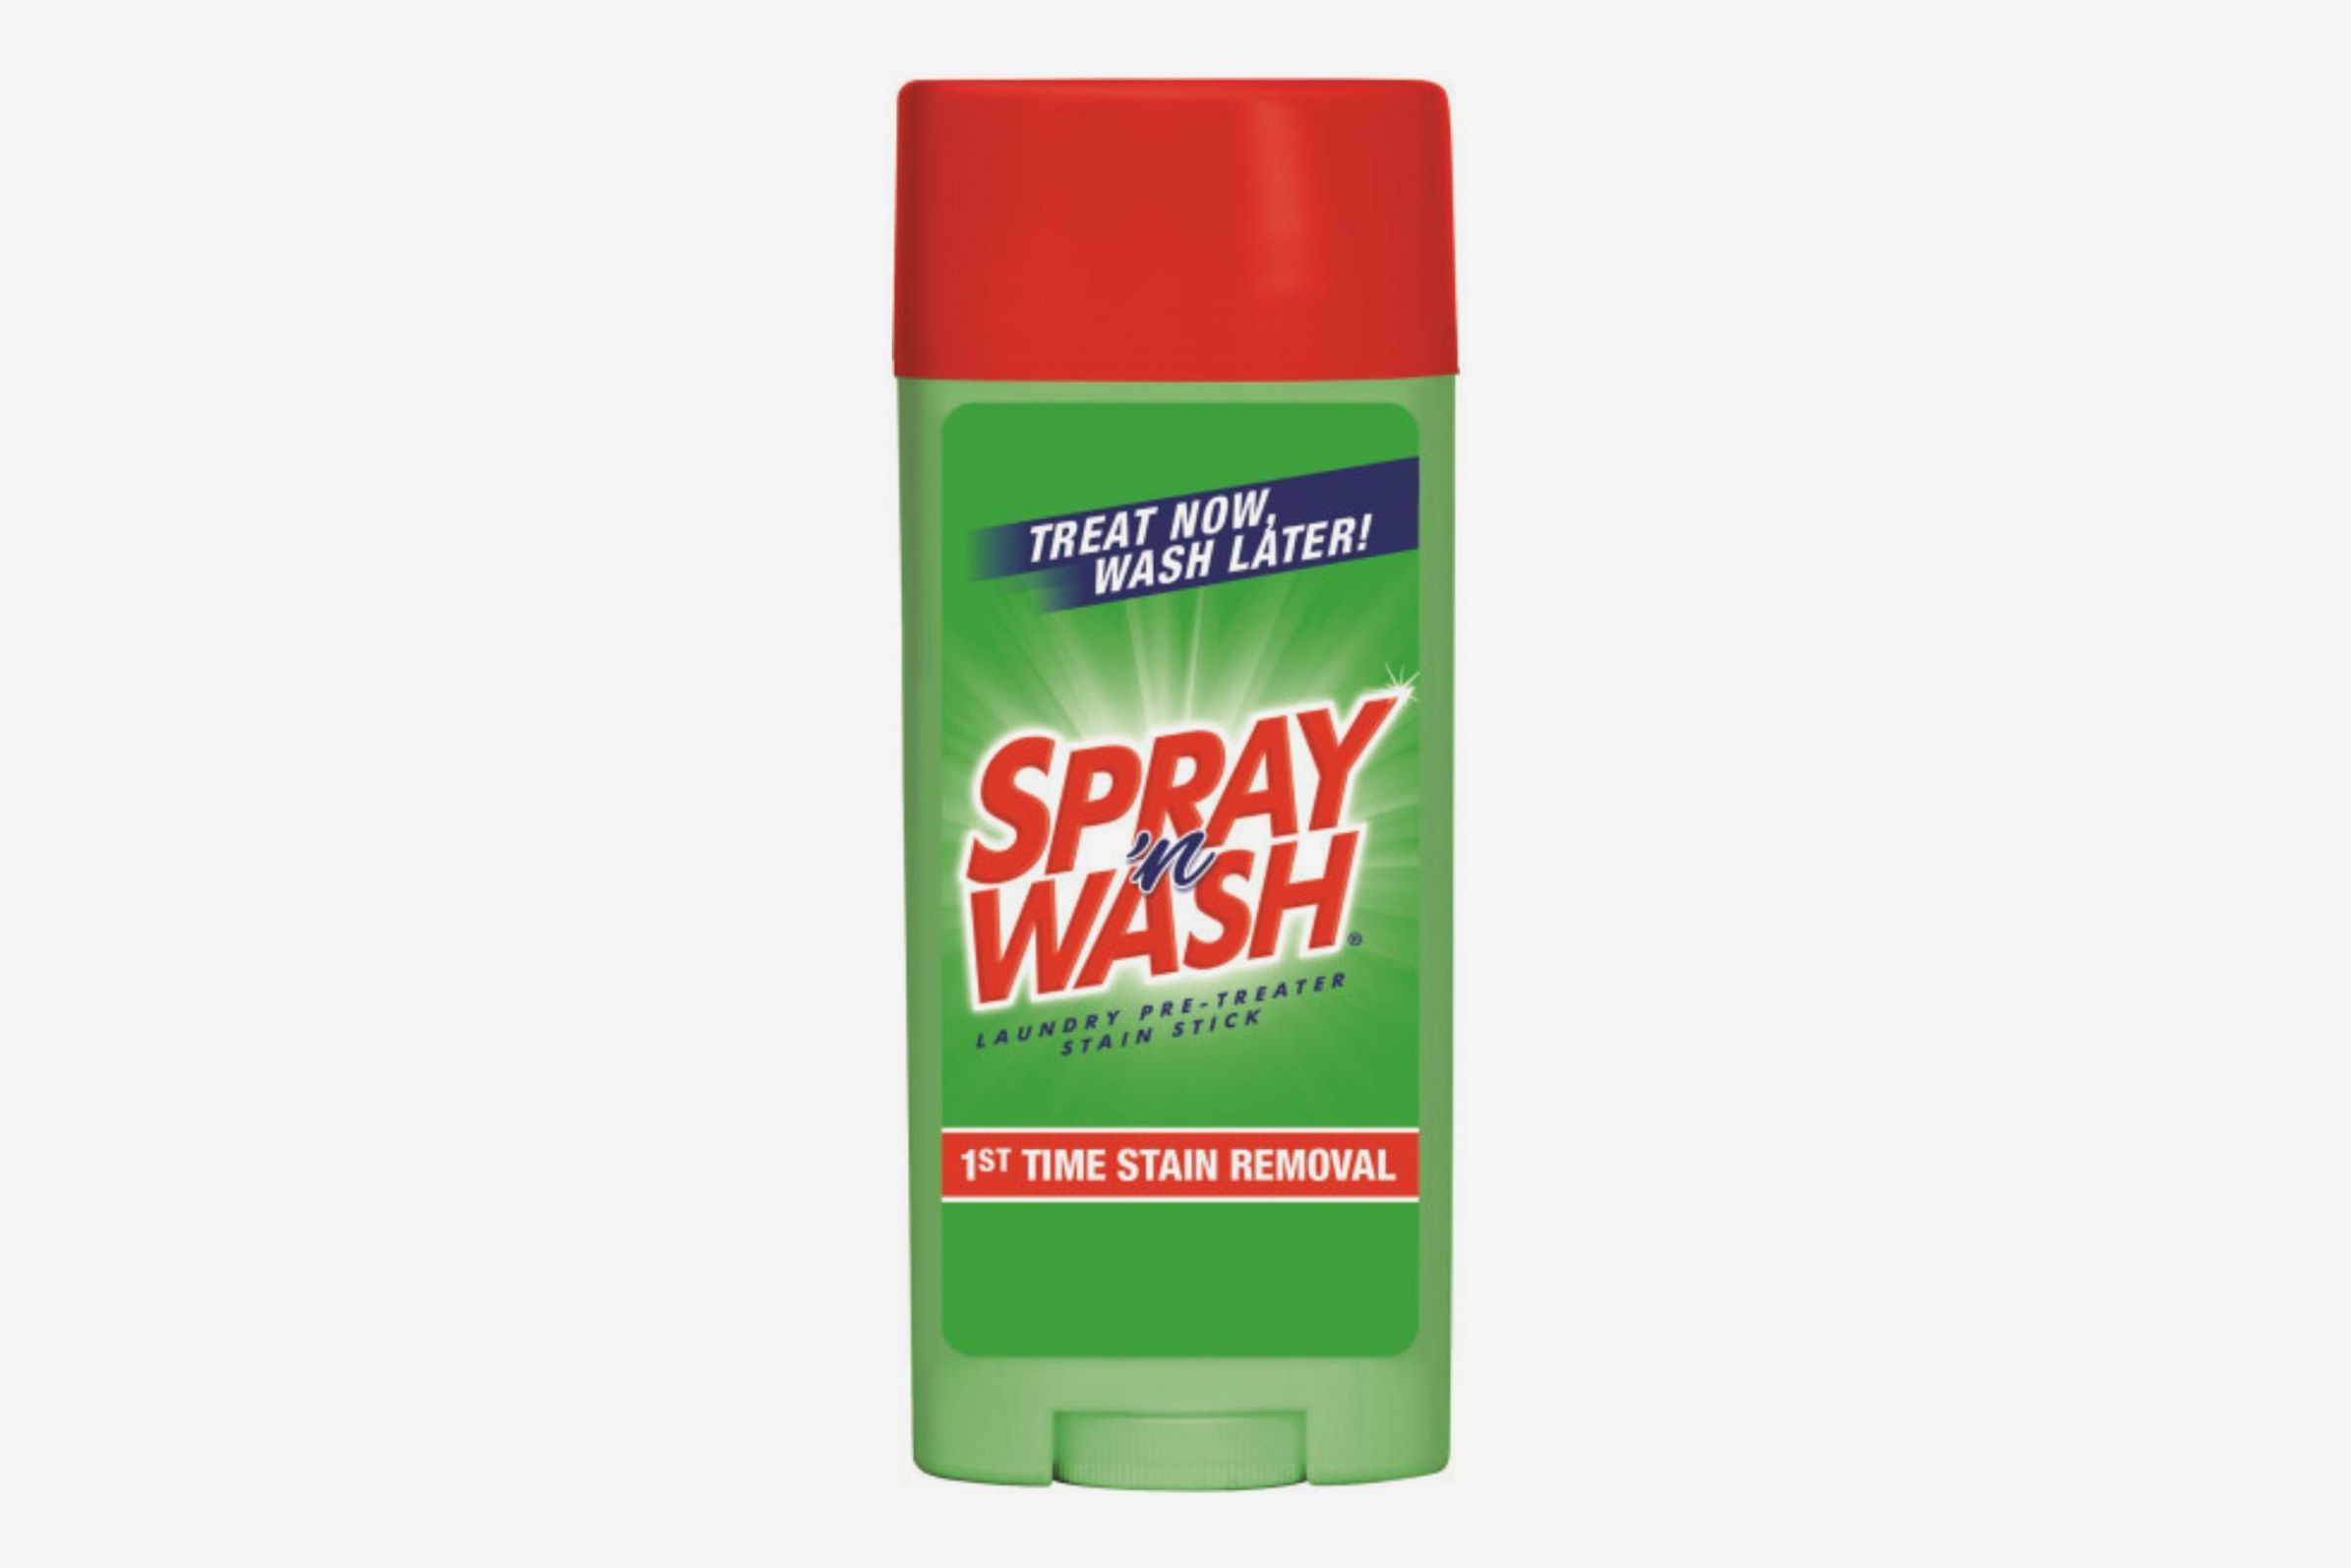 Spray n' Wash Laundry Stain Remover Review